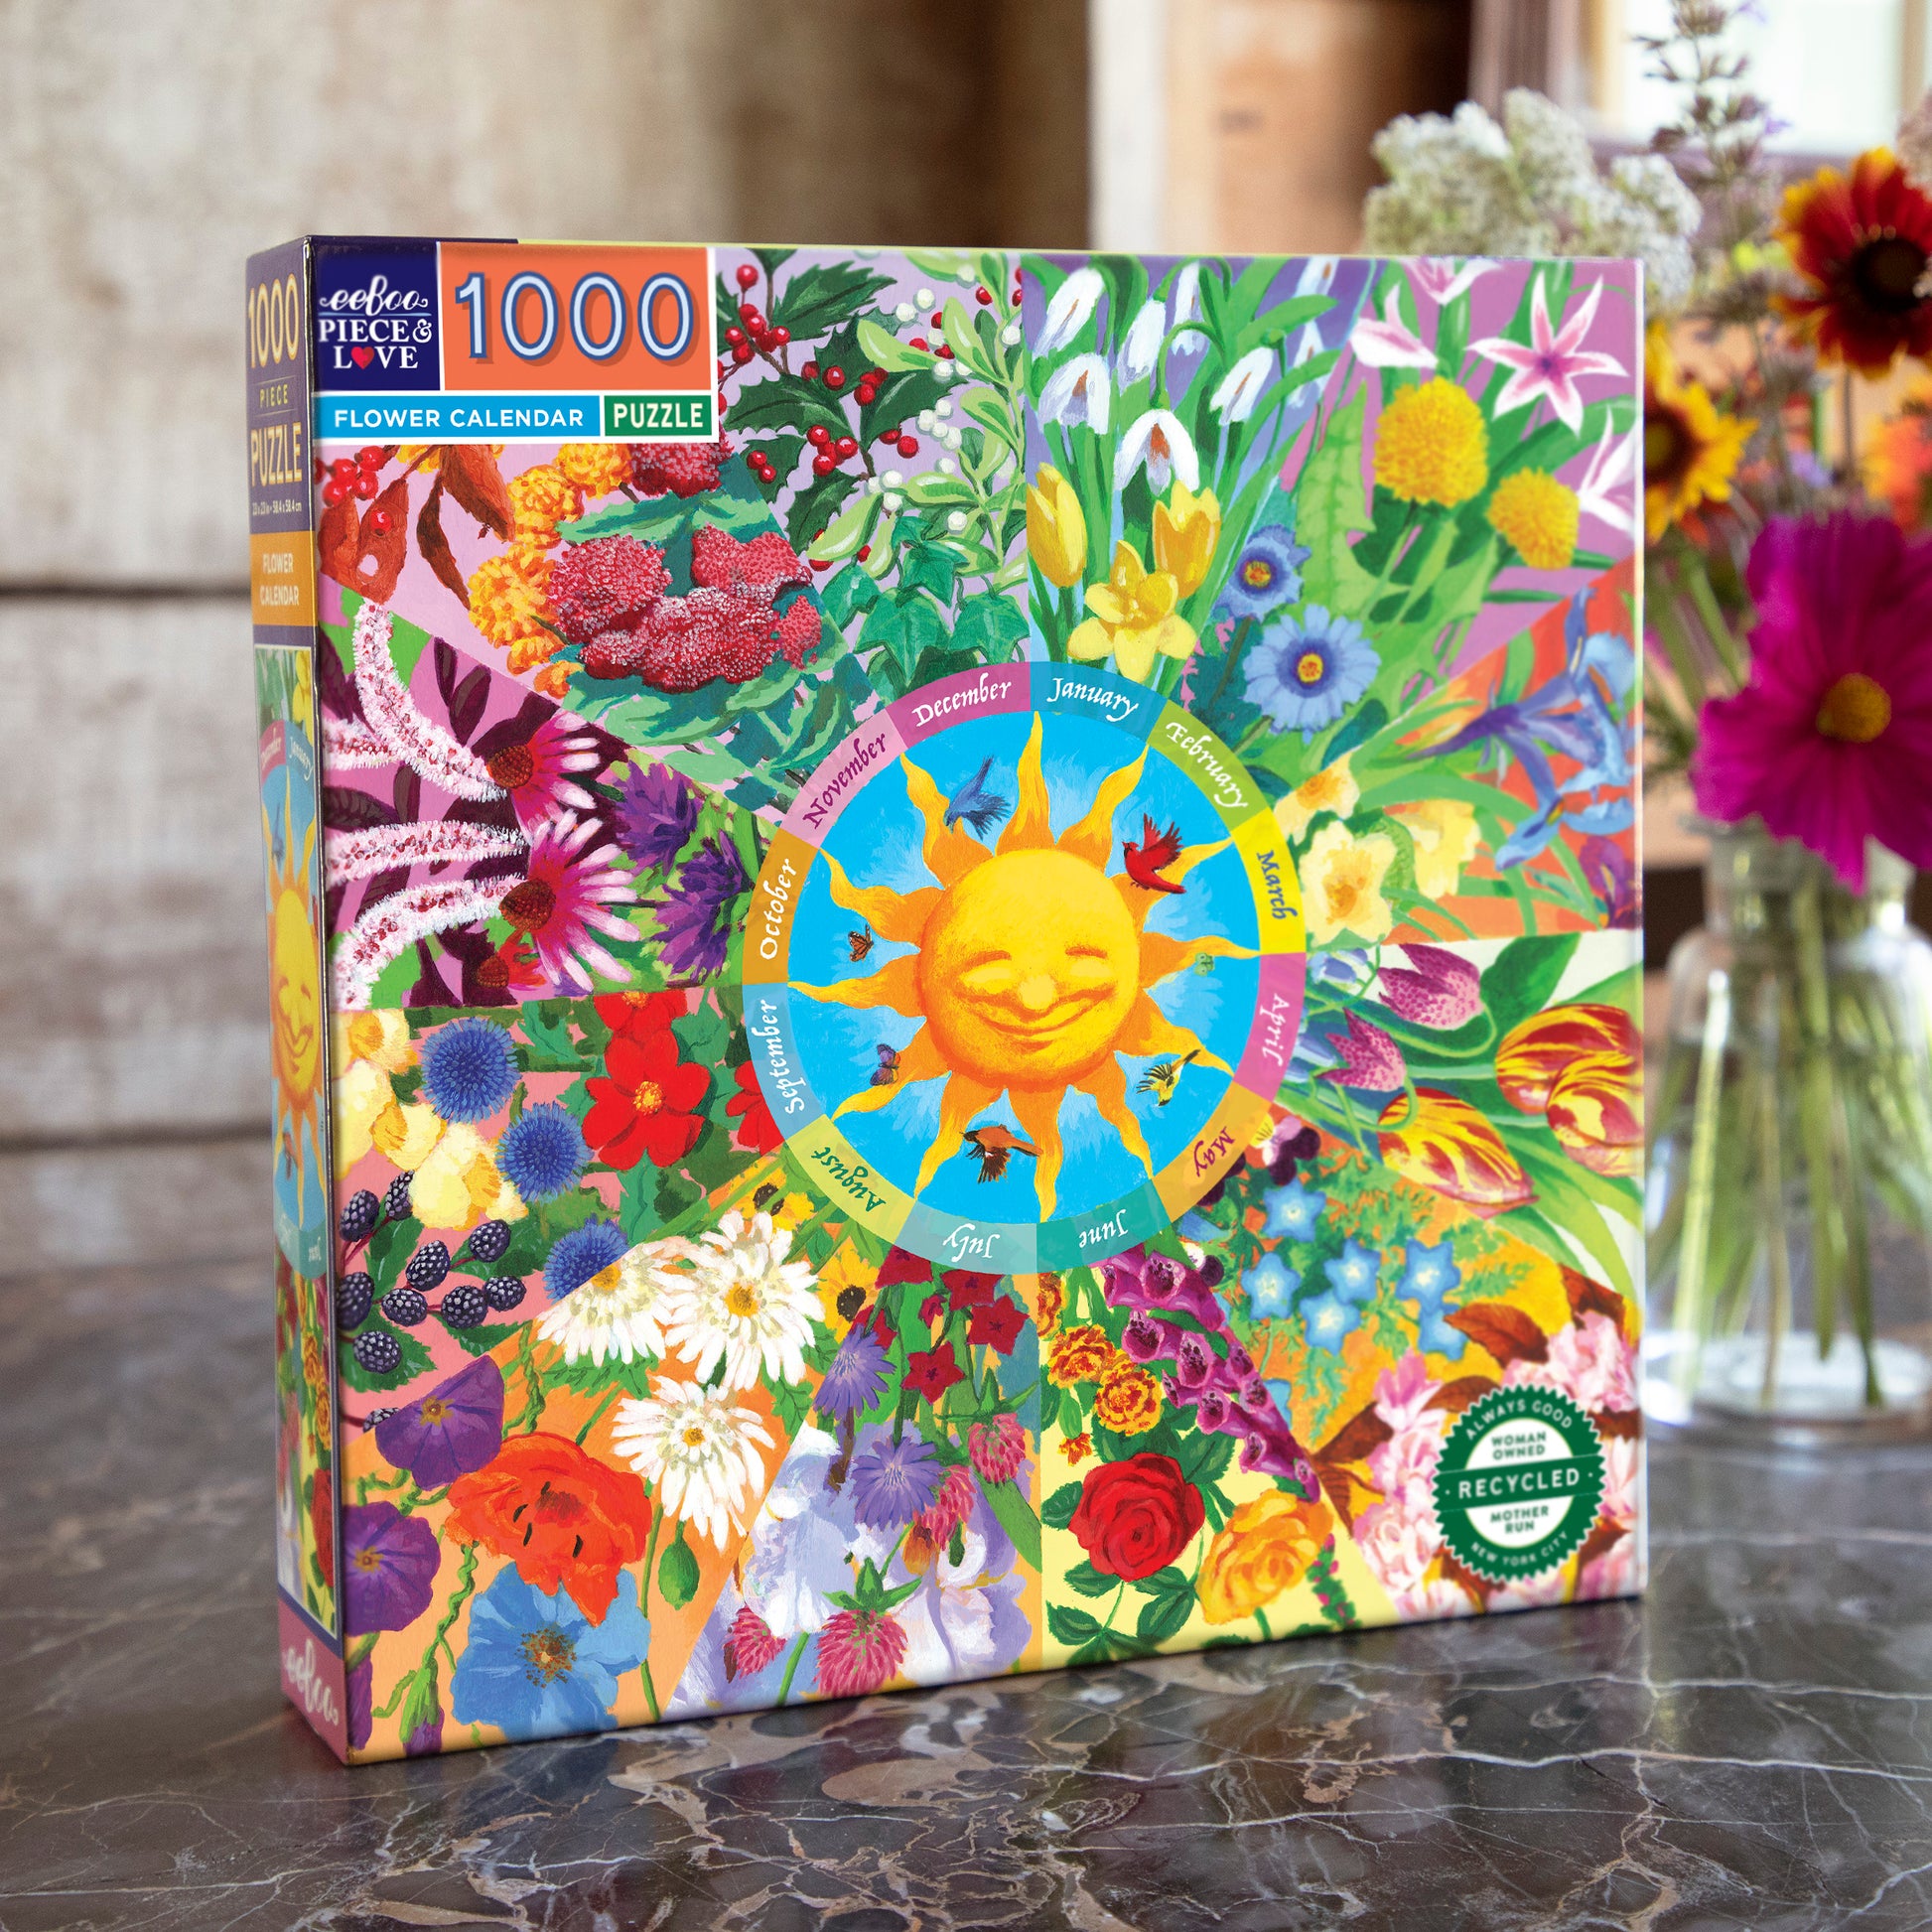 Flower Calendar 1000 Piece Square  Jigsaw Puzzle eeBoo Gifts for Garden Lovers, Plant Enthusiasts, Flower Connoisseurs 14+